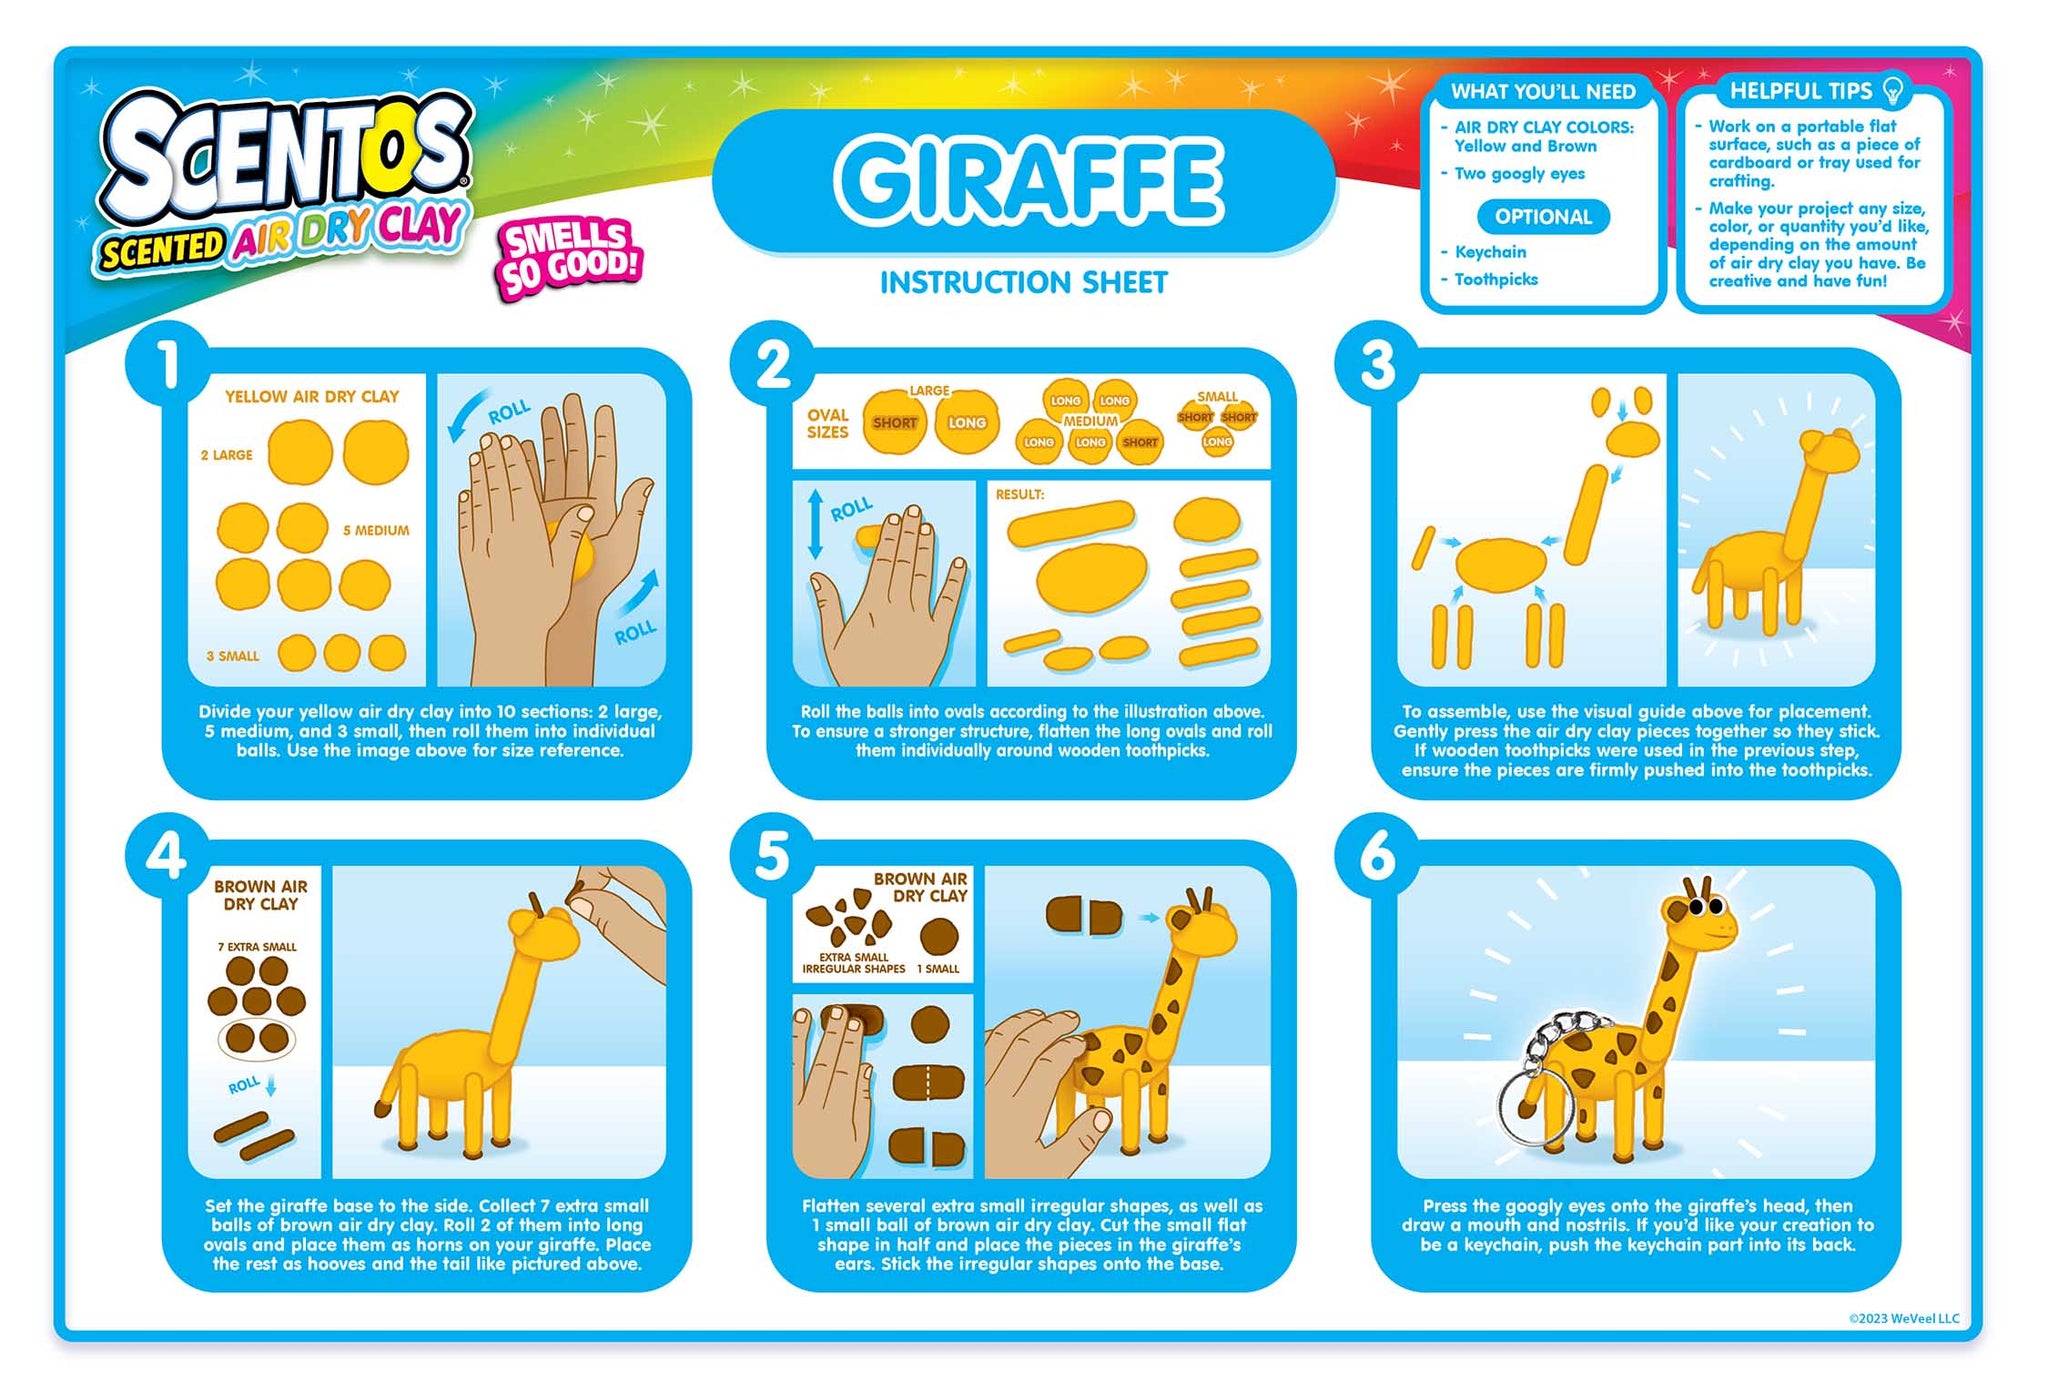 How-to instructions for a Clay Giraffe